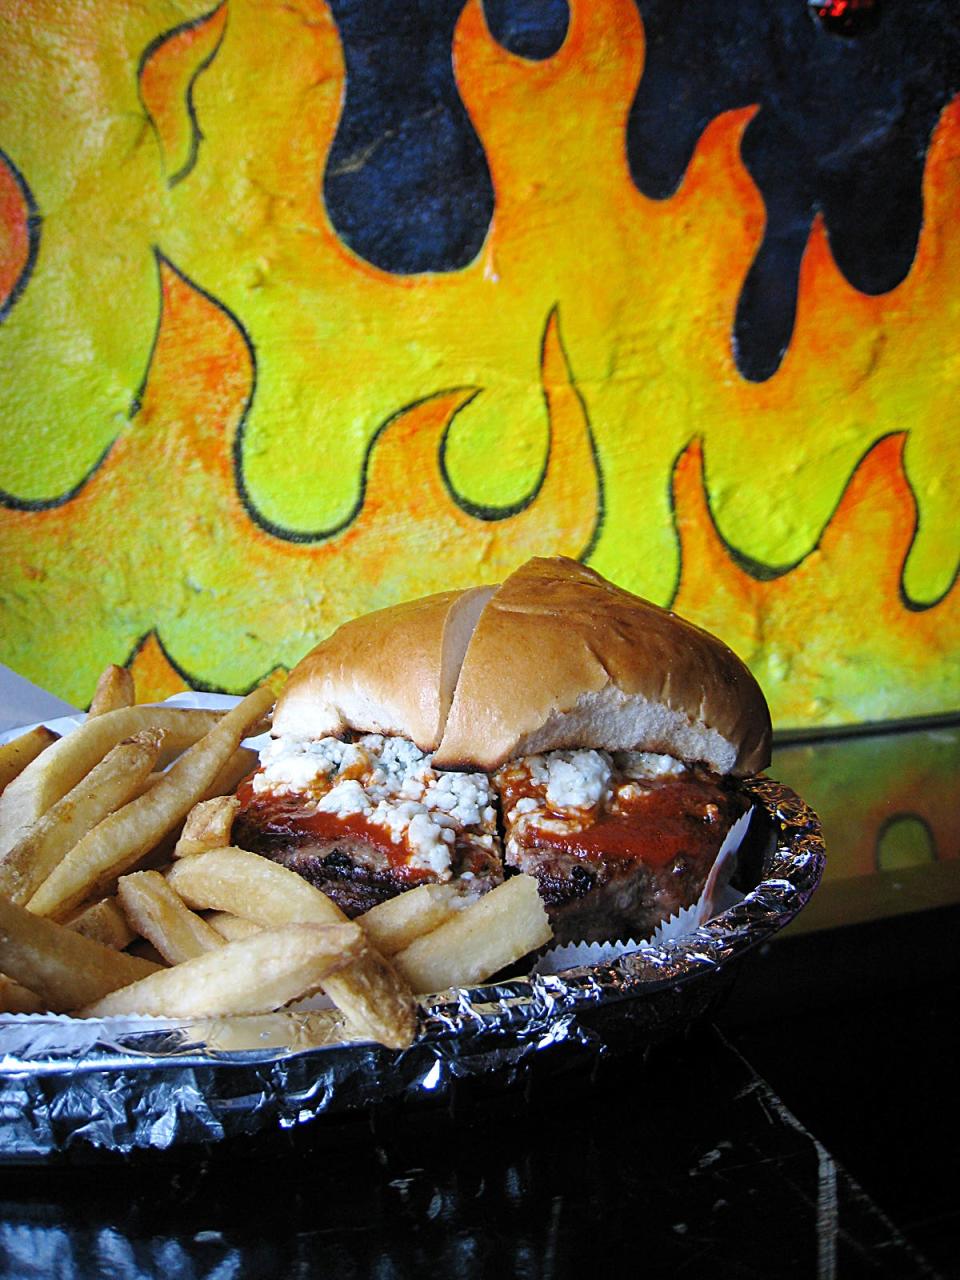 A dive bar for lunch? When the burgers are as good as they are at Casino El Camino, the answer is "Yes."